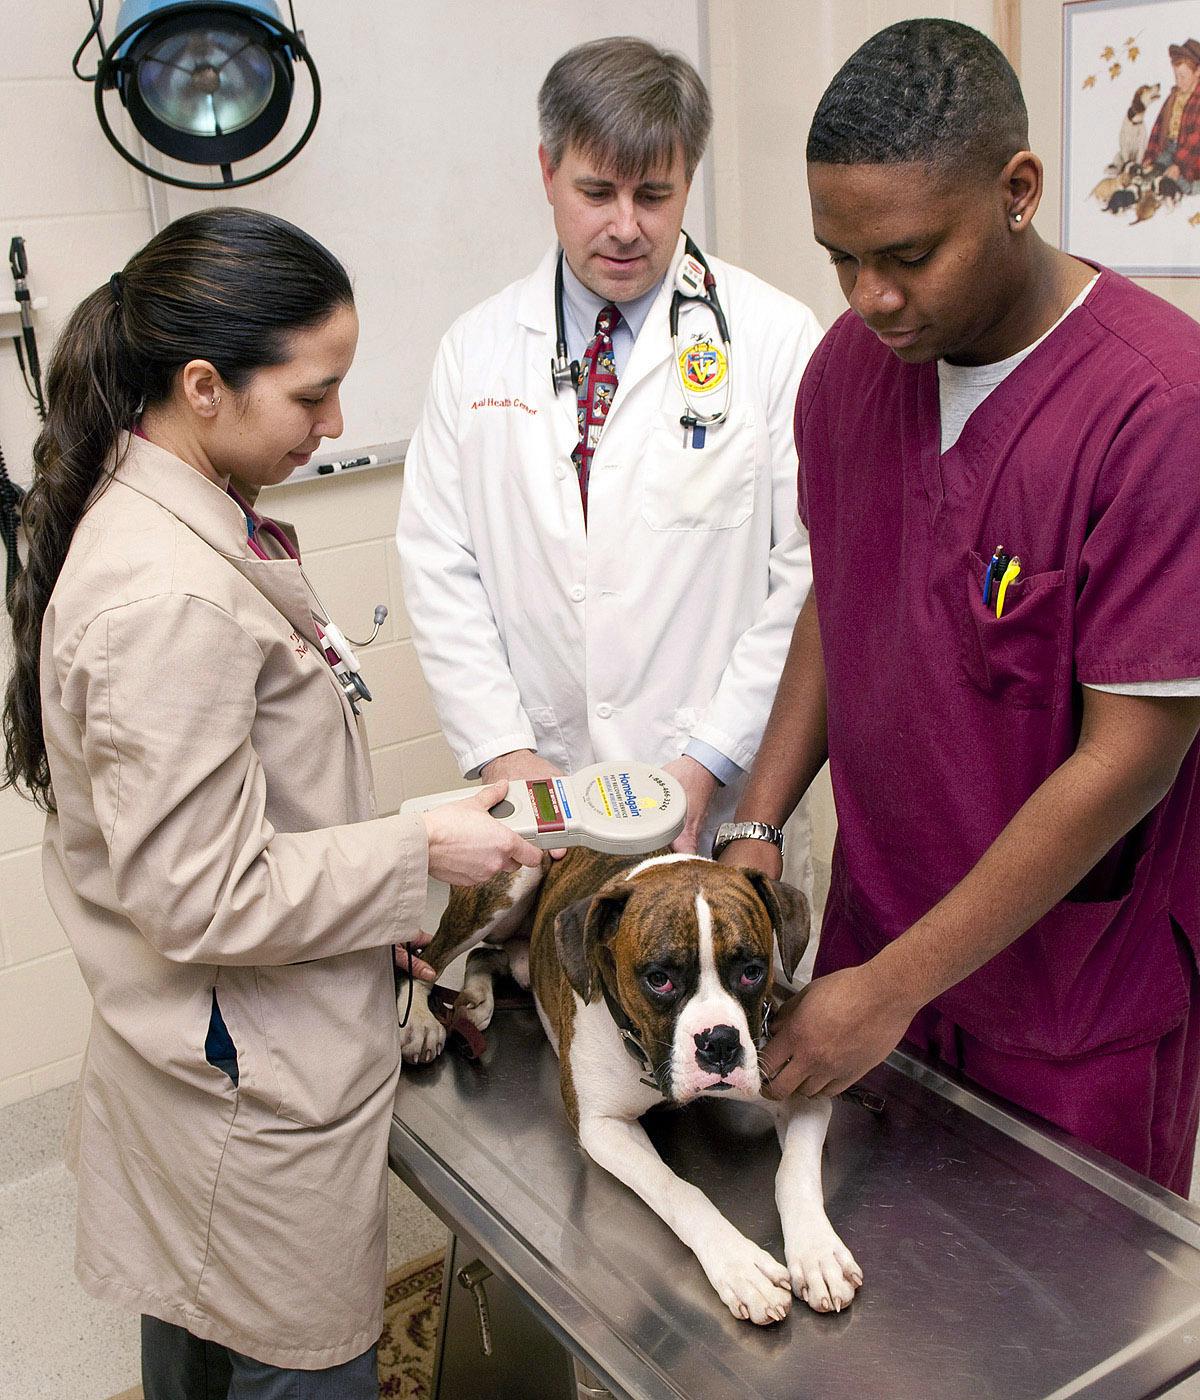 Mississippi State University College of Veterinary Medicine student Kamalailia Neizmen (left) locates a patient's microchip with a sensor as veterinary technician Elliot Benford (right) assists and assistant clinical professor Dr. Jody Ray supervises. (Photo by MSU's College of Veterinary Medicine/Tom Thompson)